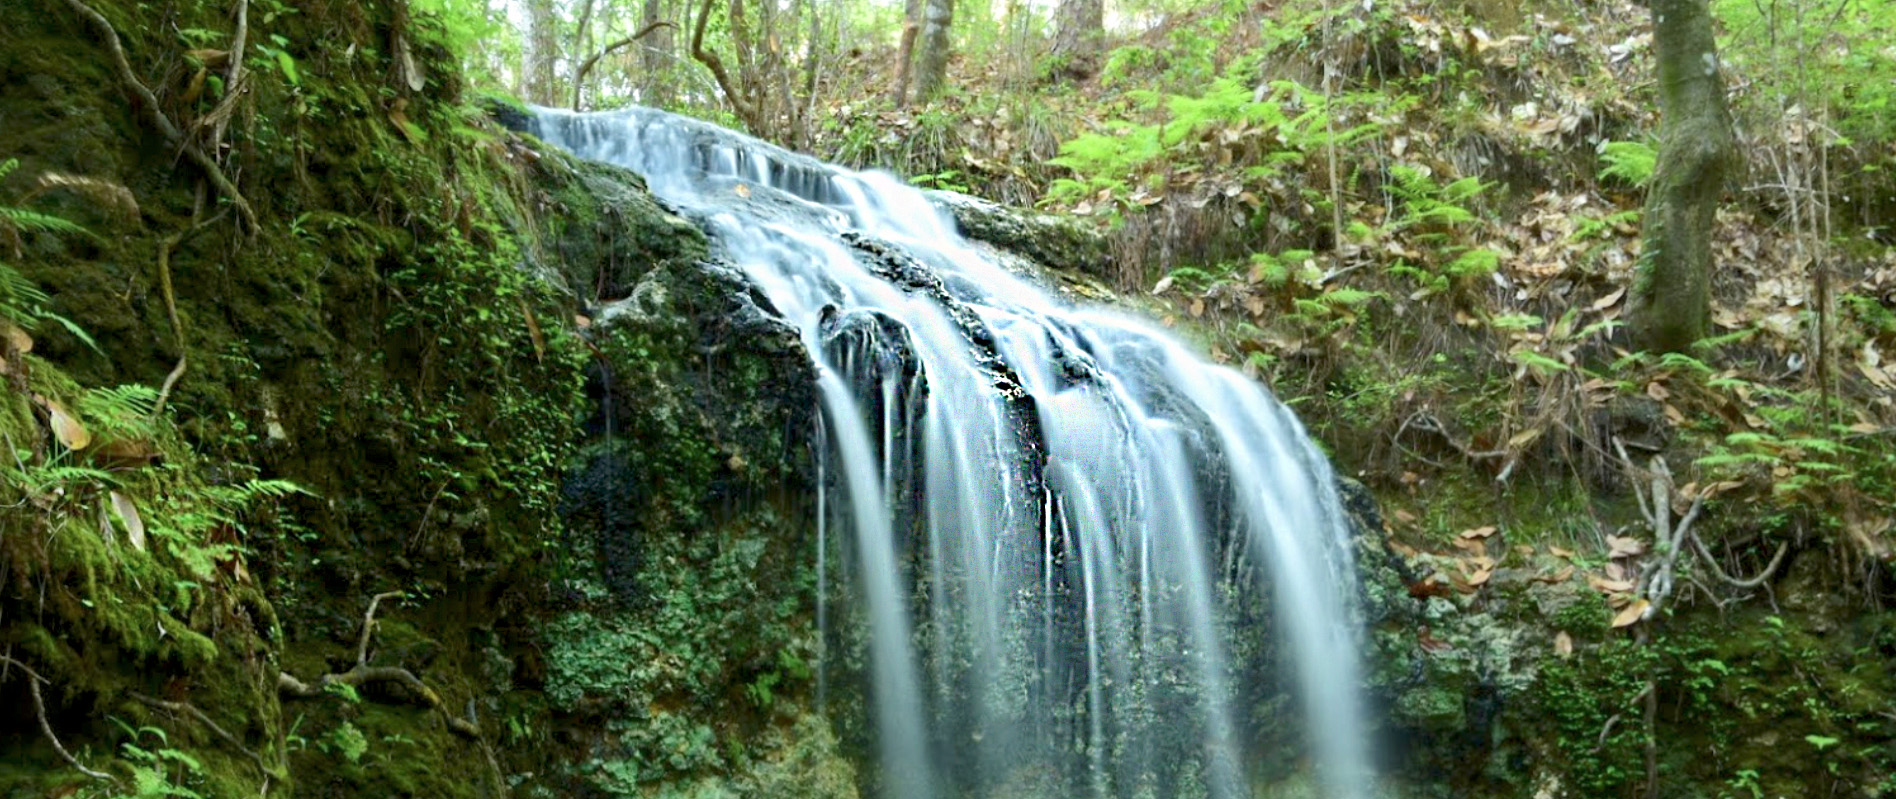 time-lapse photo of the waterfall at falling waters state Park in Florida